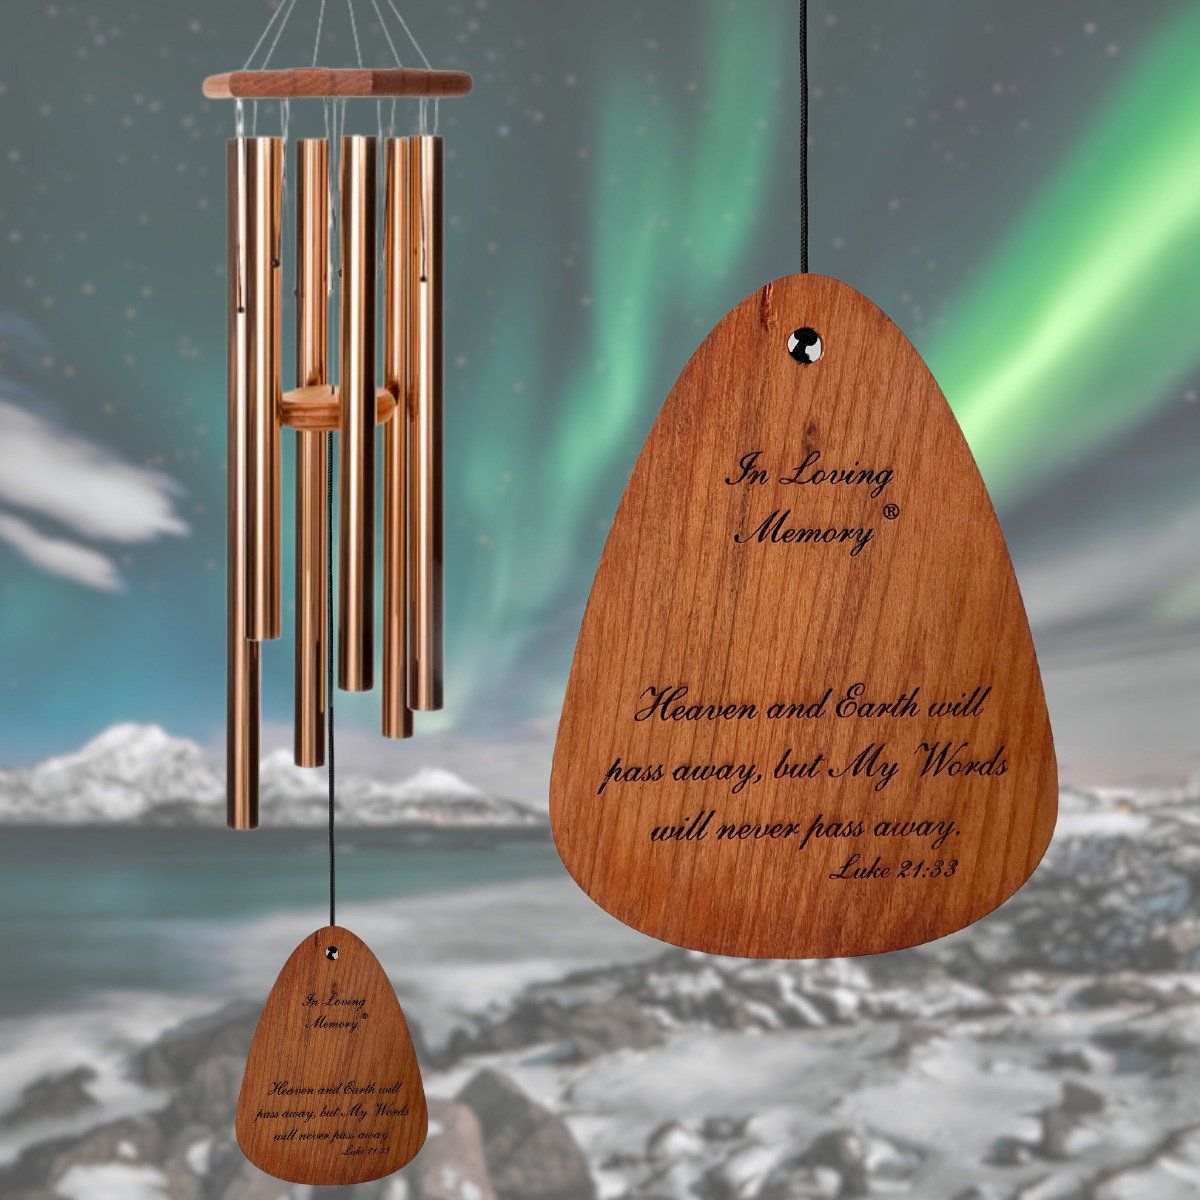 In Loving Memory 42 Inch Windchime - ..My Words will never pass away.... in Bronze